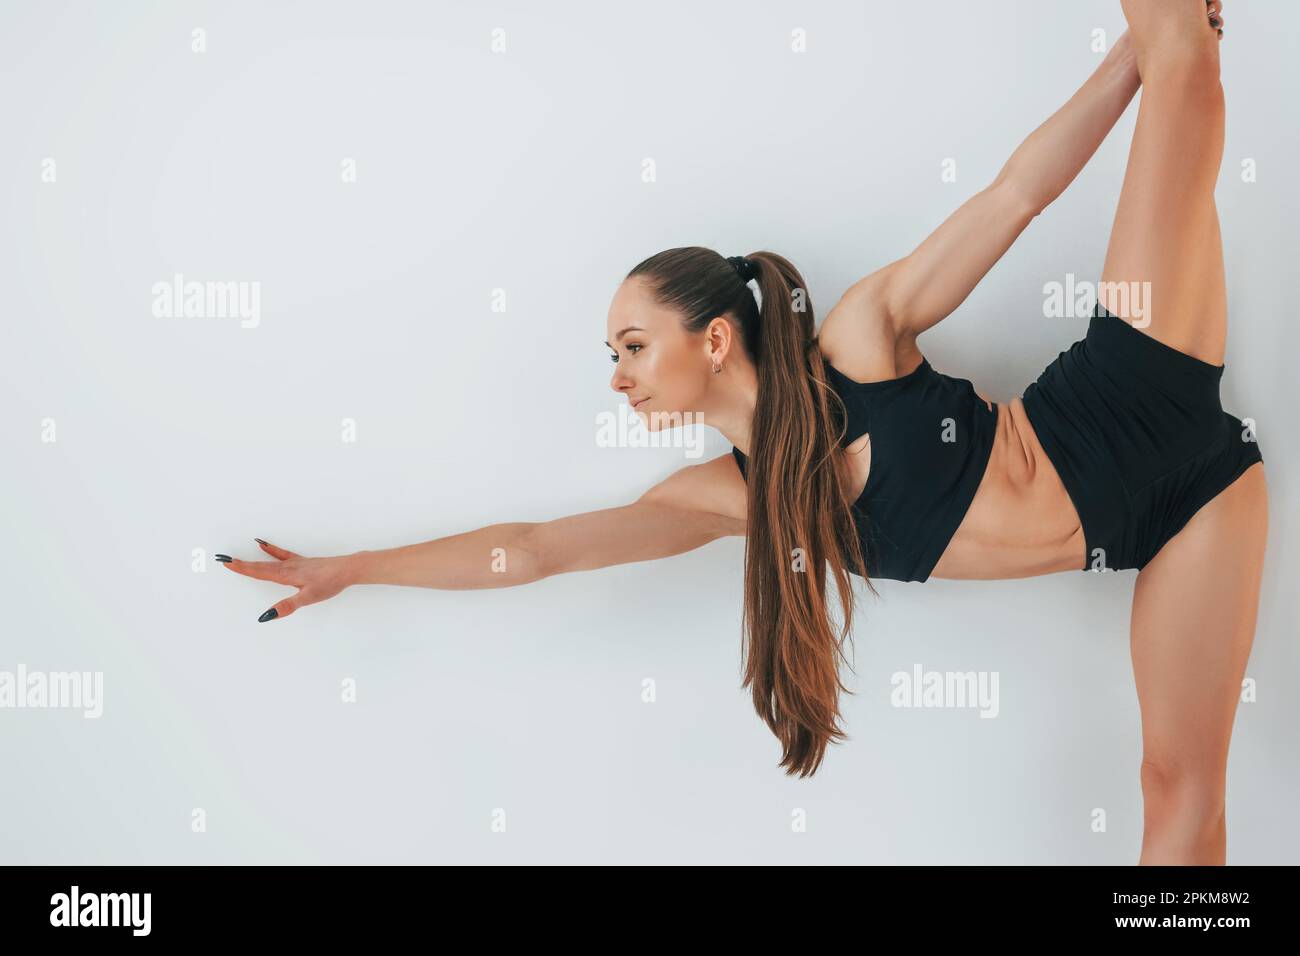 Standing against white background. Young woman in sportive clothes doing gymnastics indoors. Stock Photo